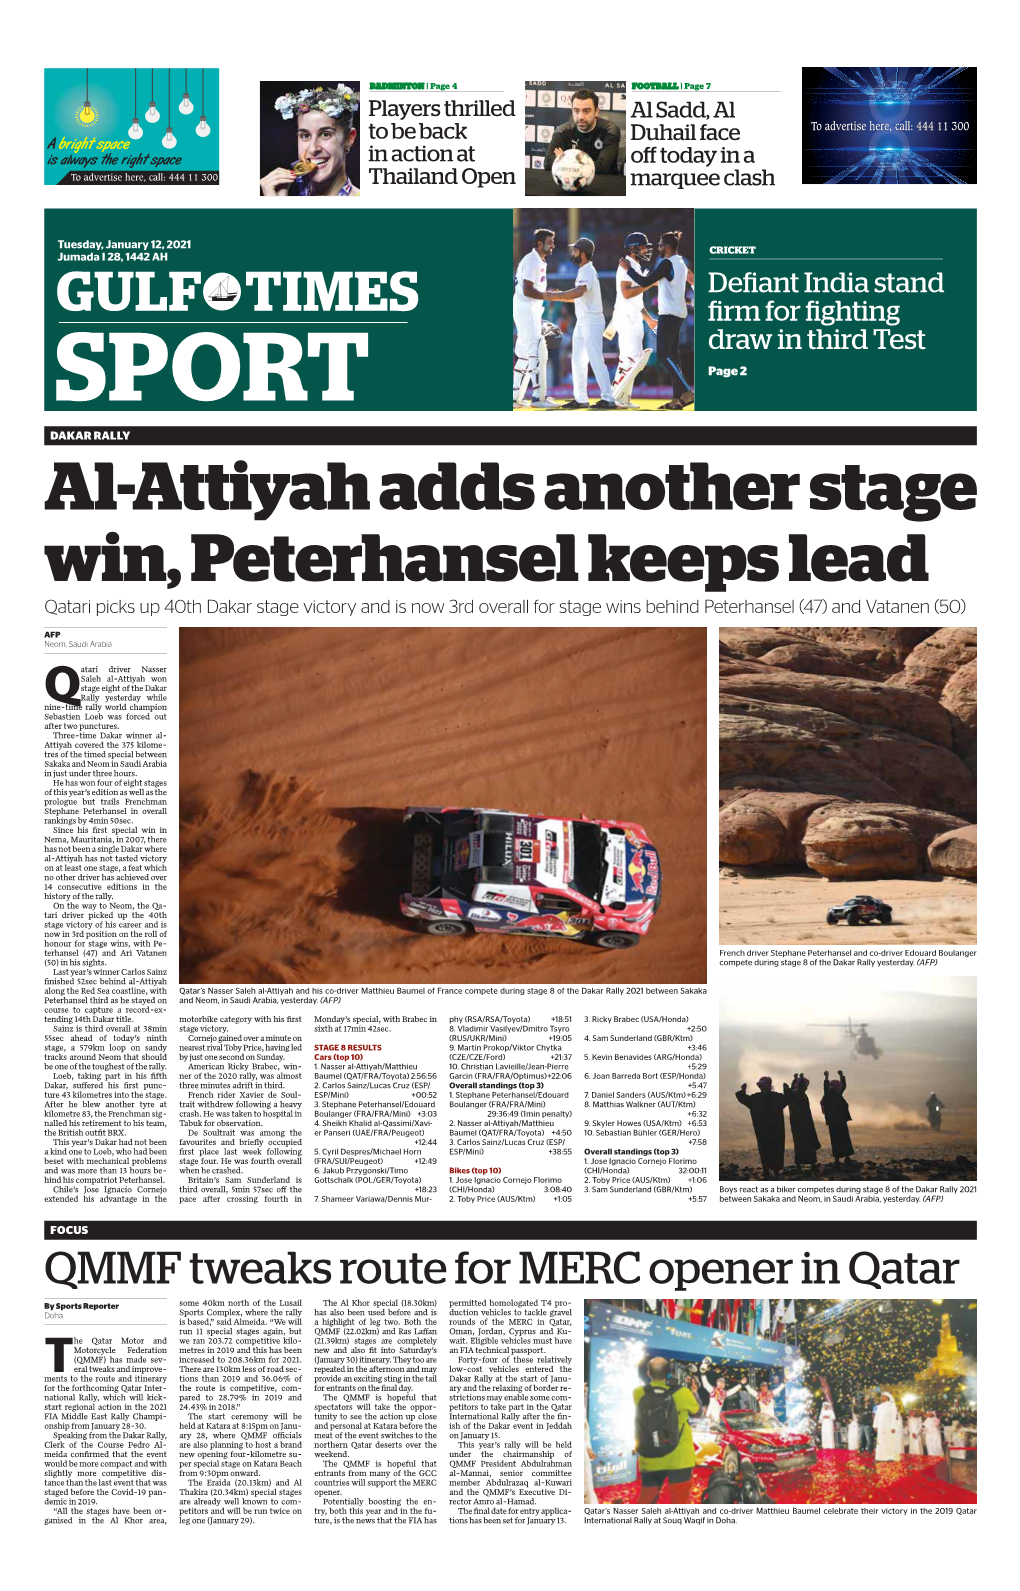 Al-Attiyah Adds Another Stage Win, Peterhansel Keeps Lead